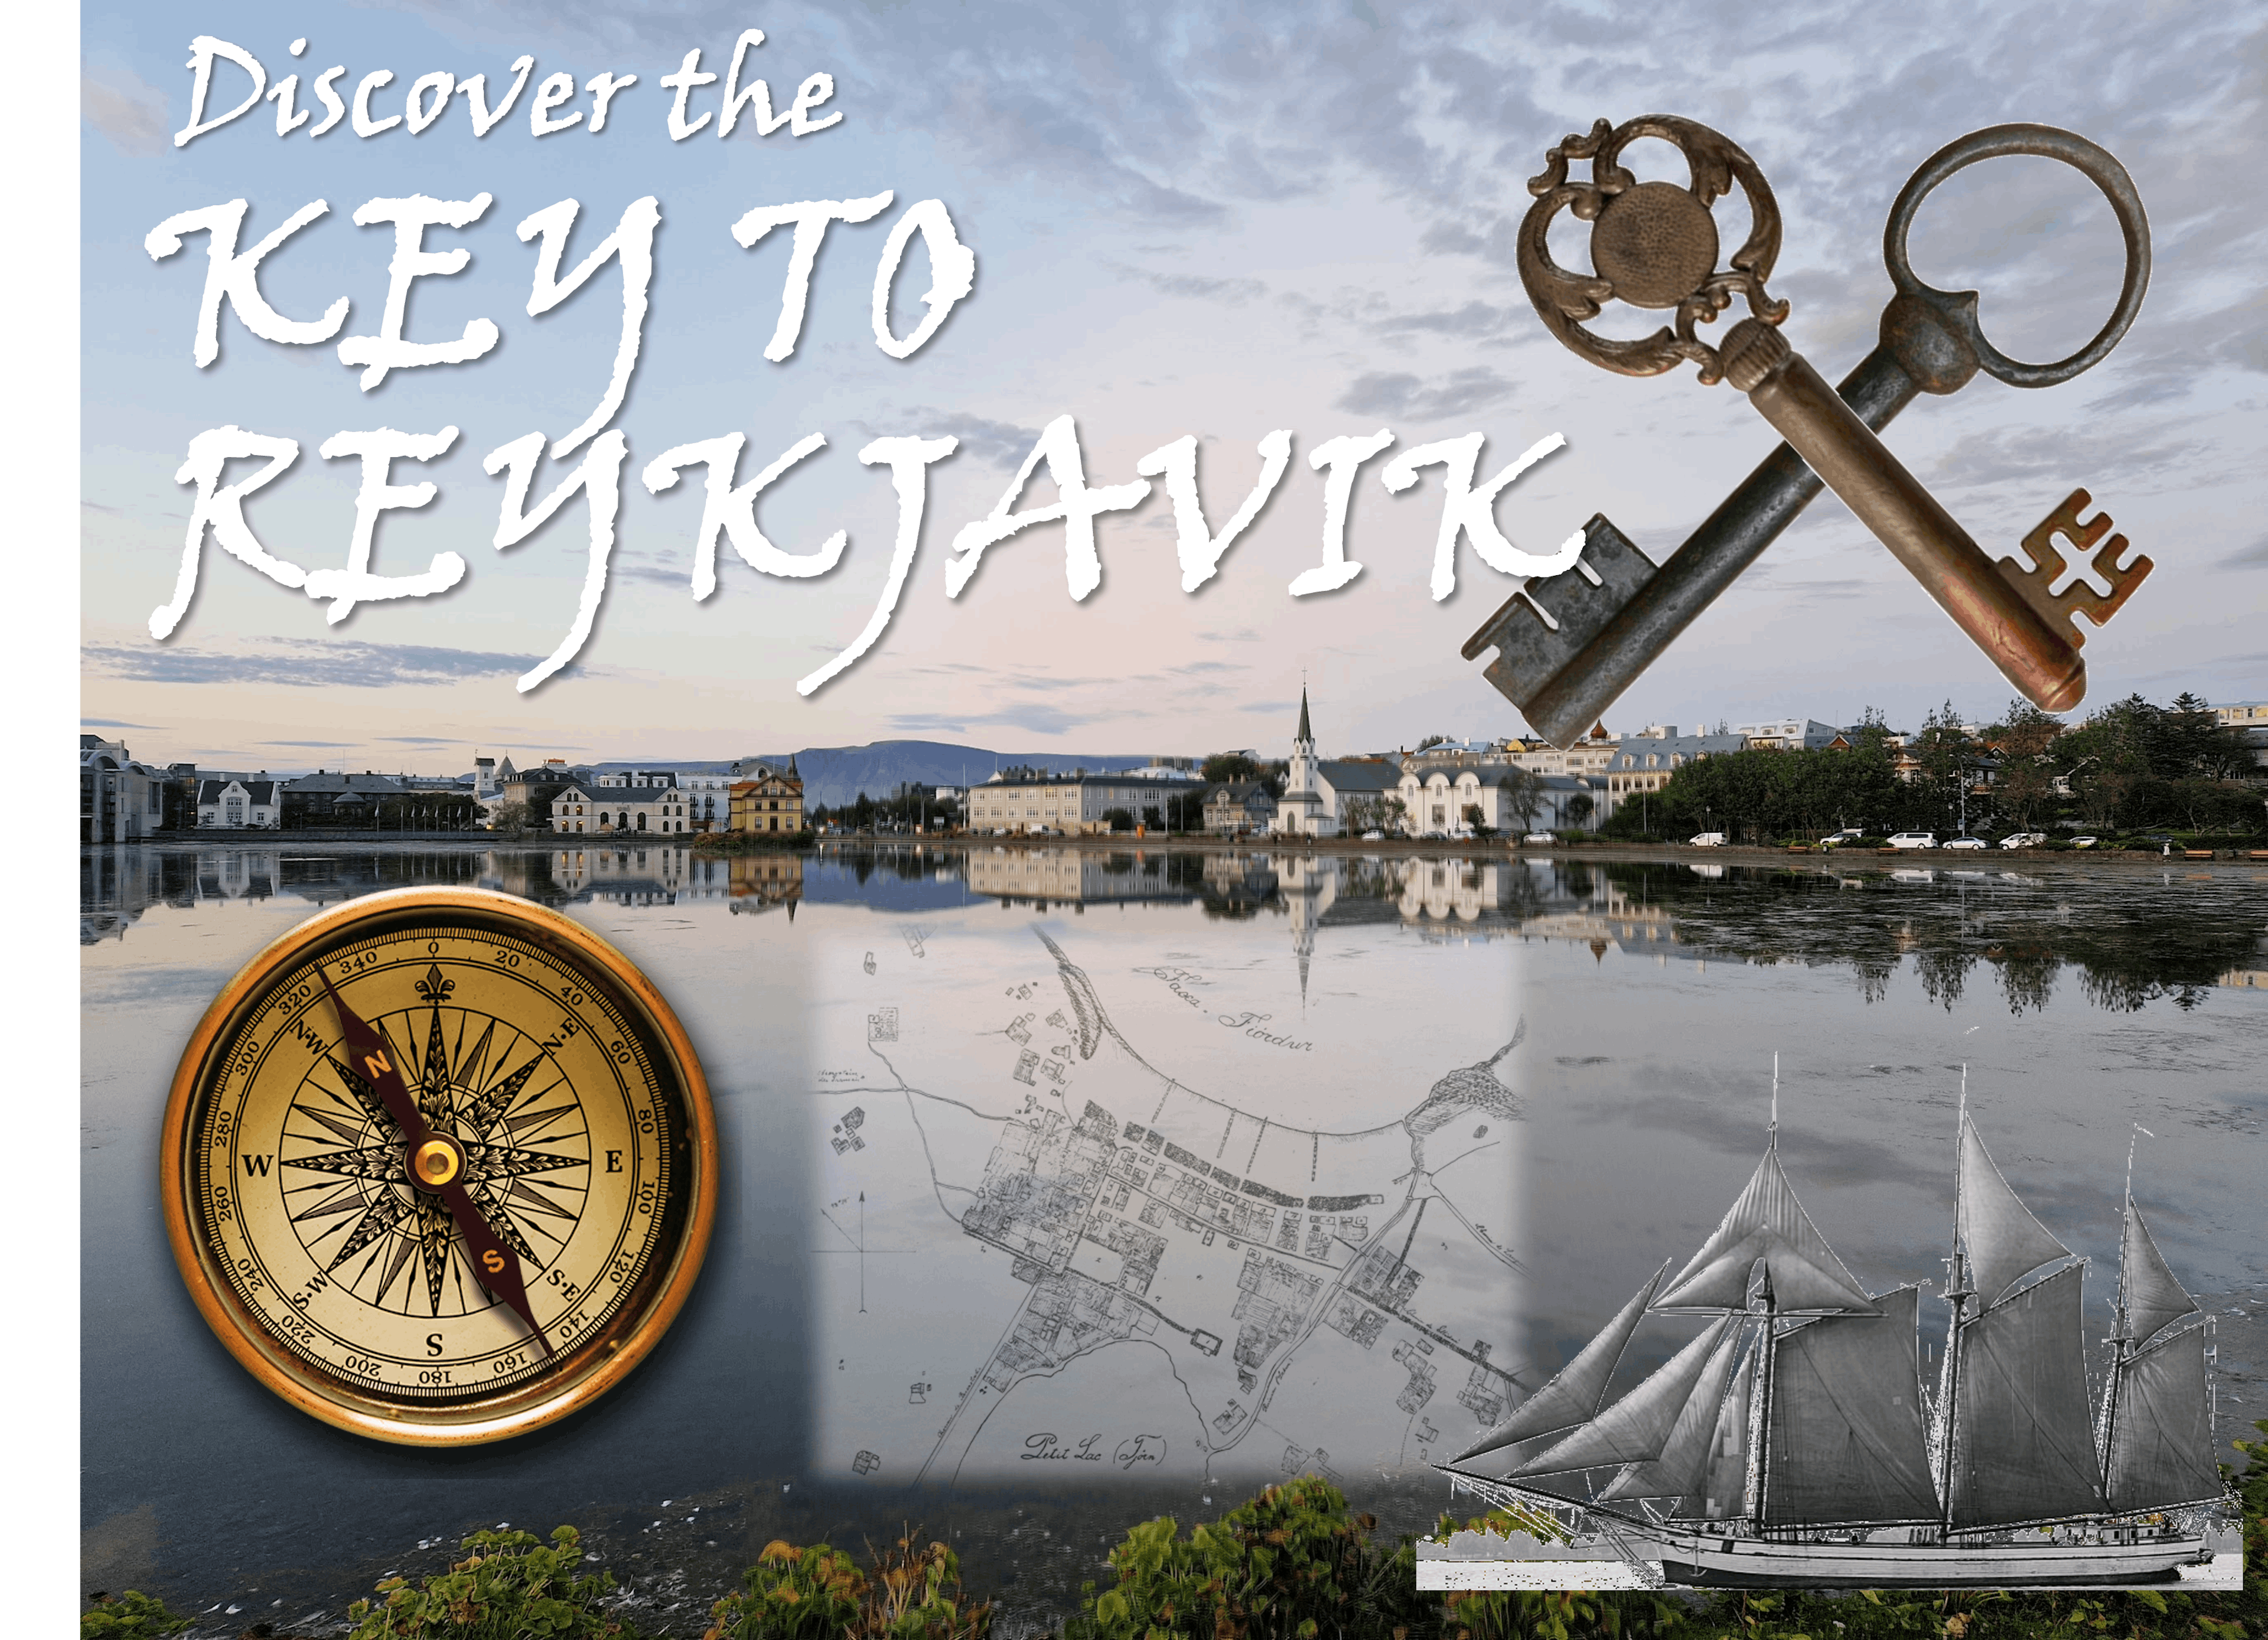 Discover the key to Reykjavik